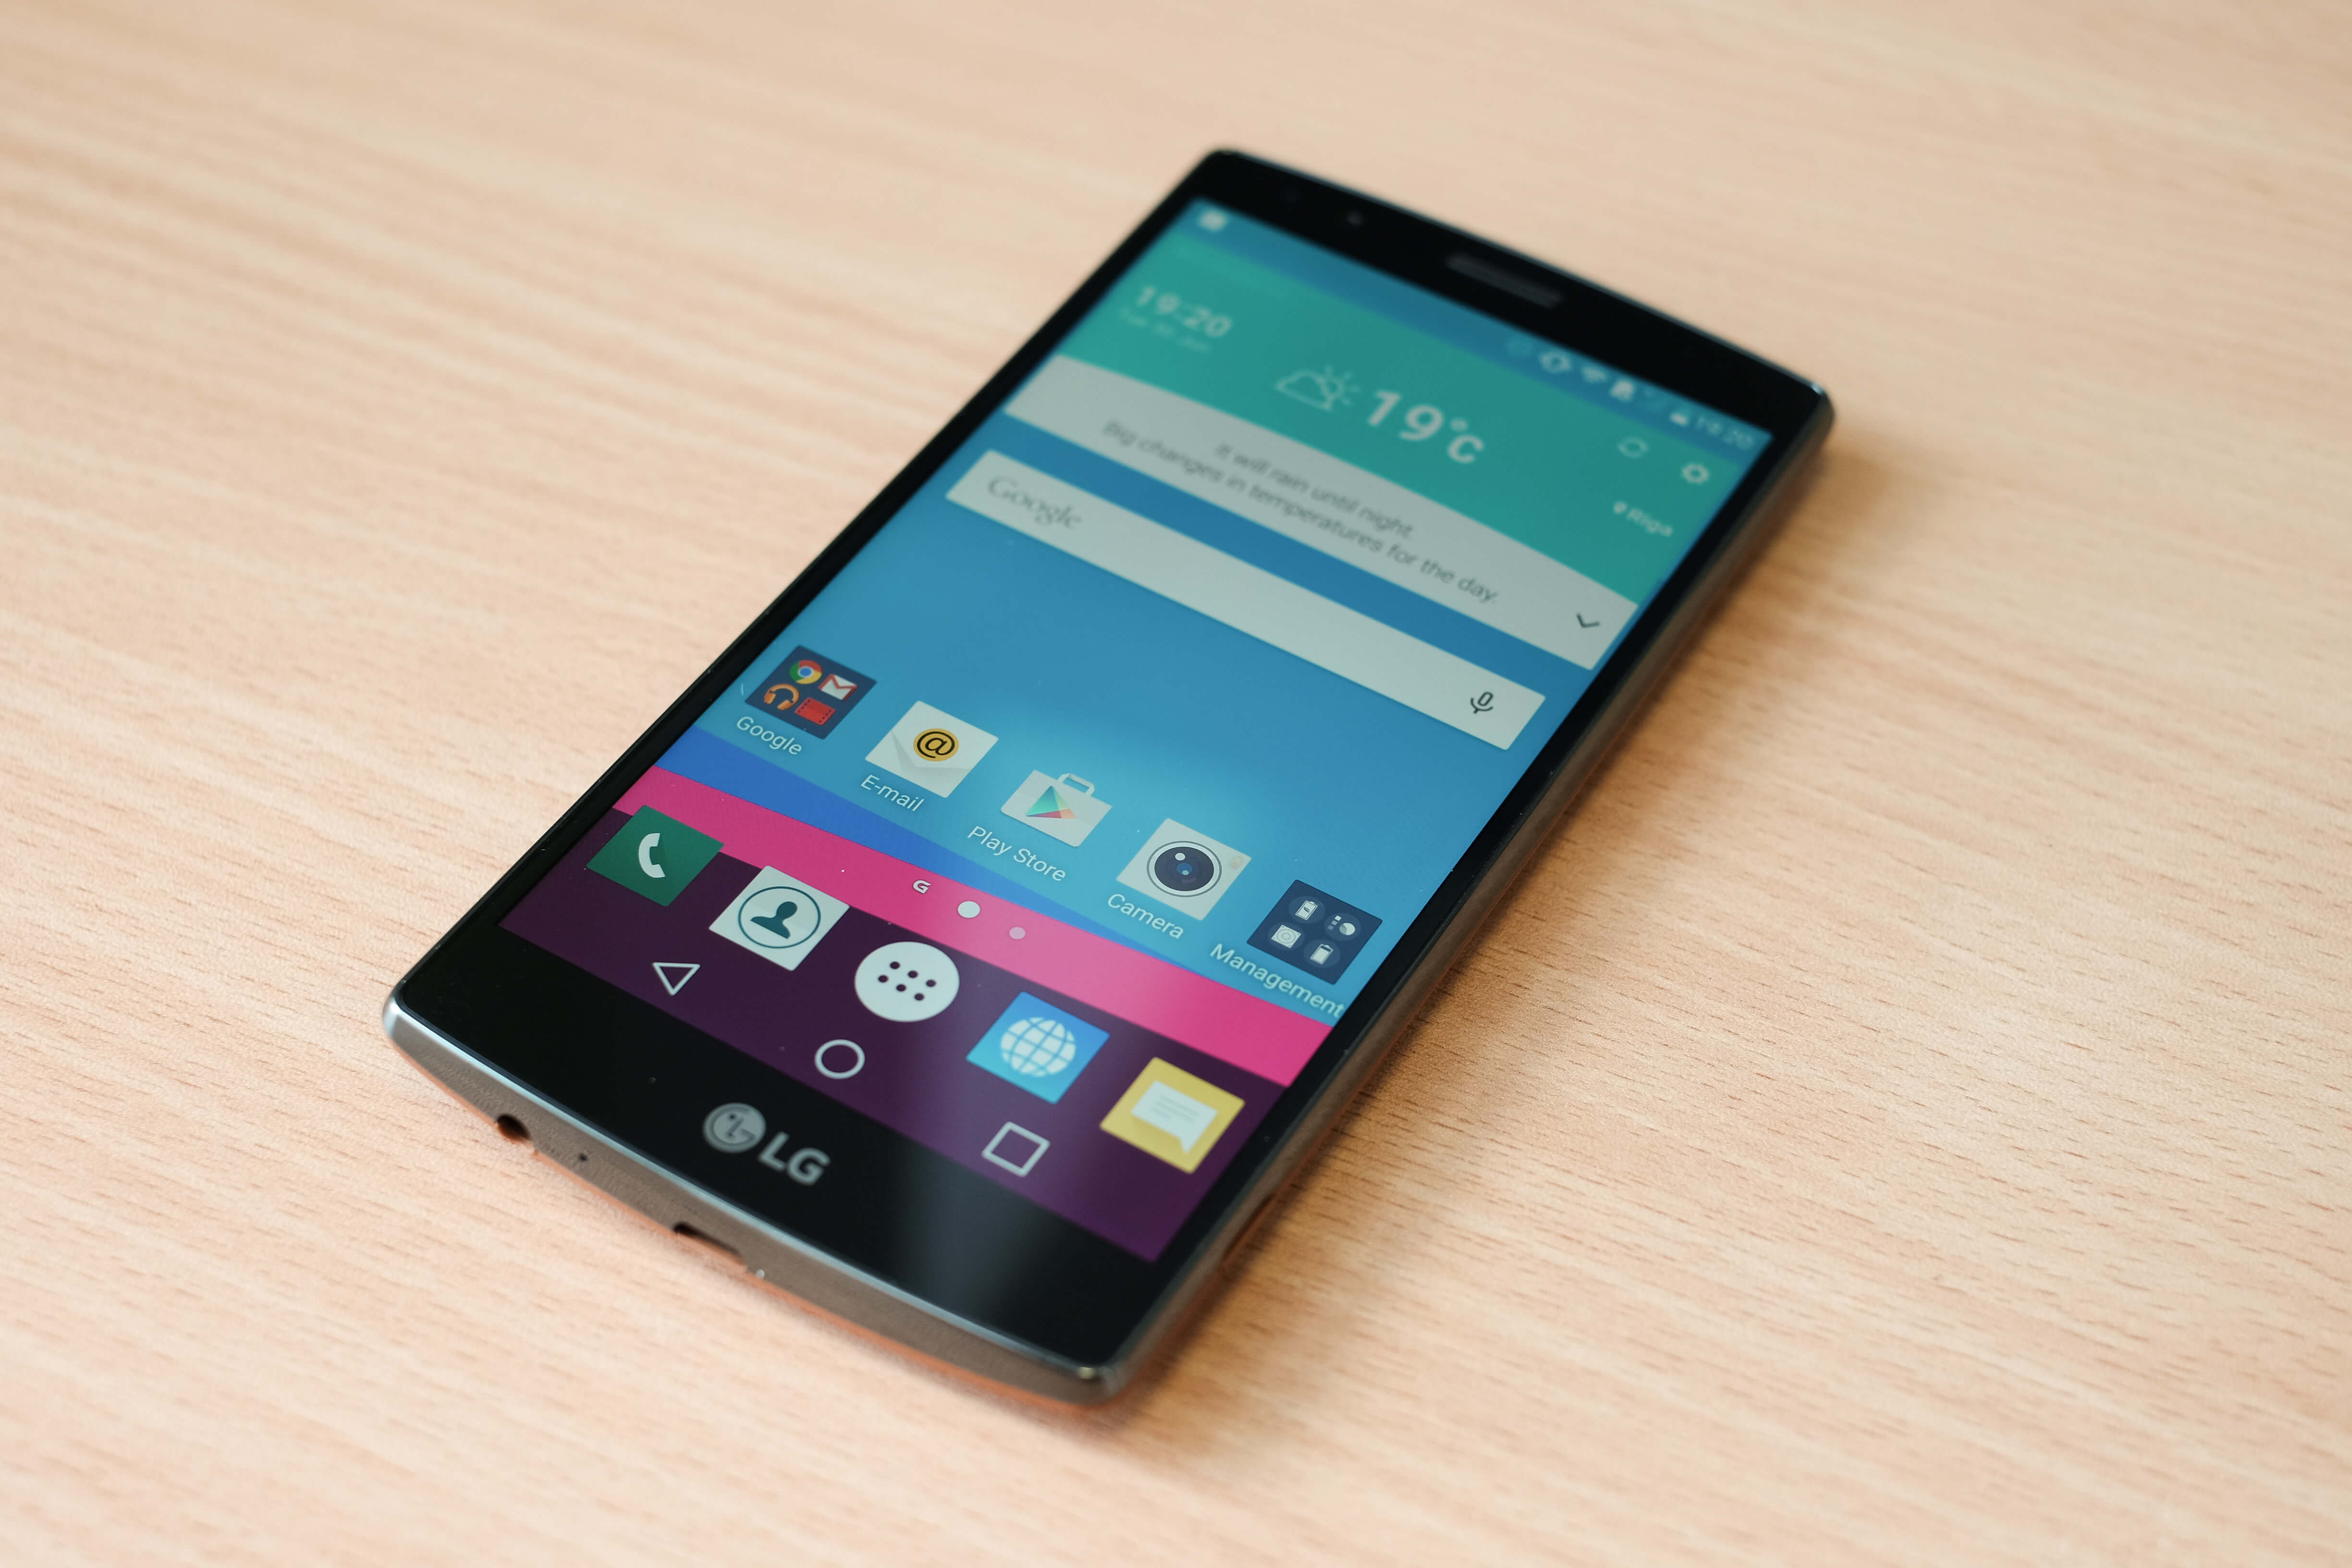 LG G4 sells for $0.01 in Amazon Prime Day screwup